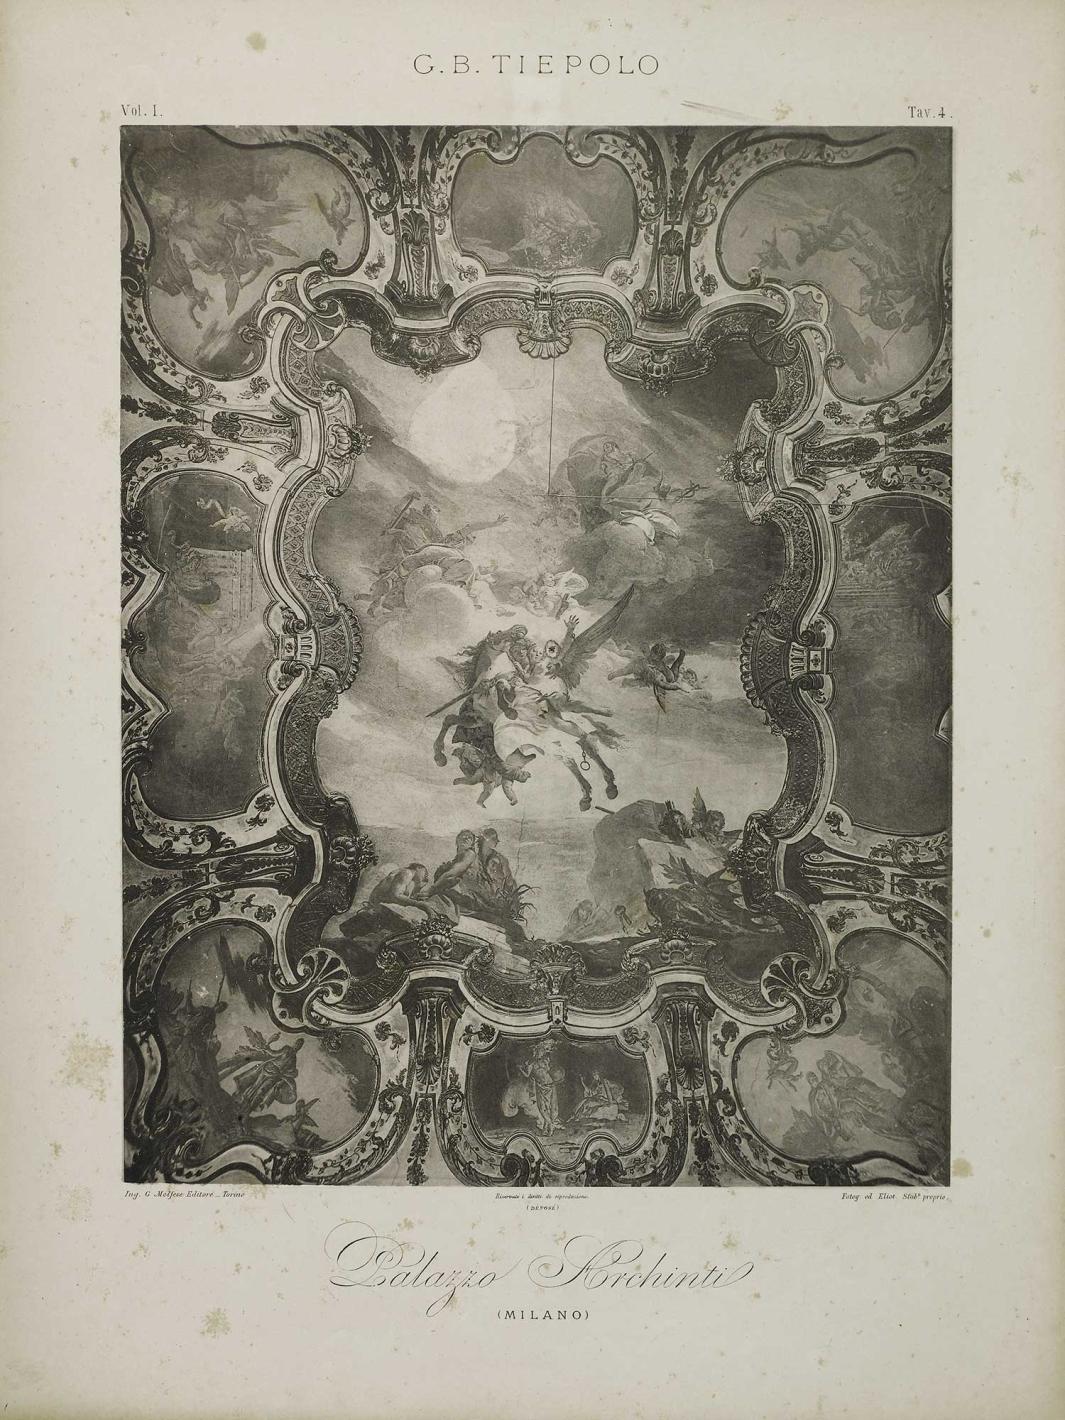 Photograph of a frescoed ceiling.